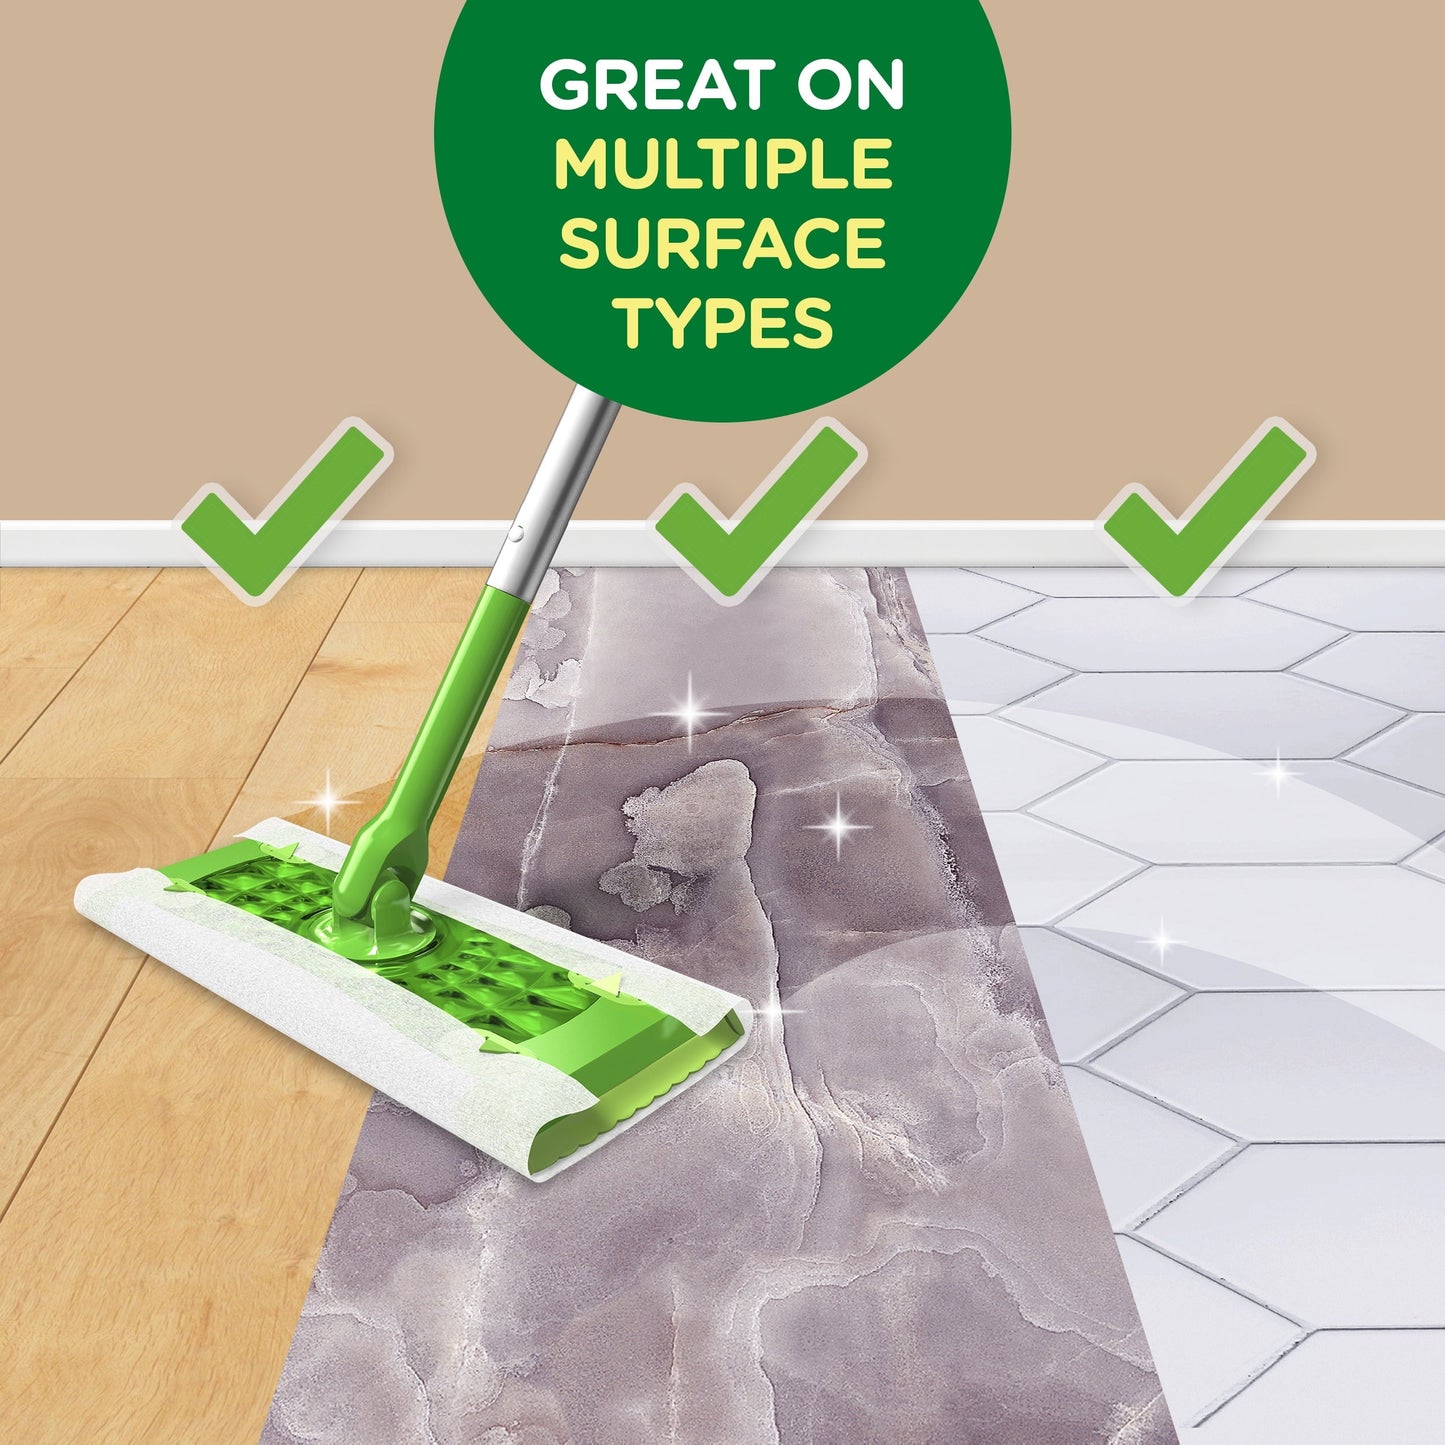 Swiffer Sweeper Dry Sweeping Pad Floor Cleaner Refills for Dust Mop, Gain, 32 Count